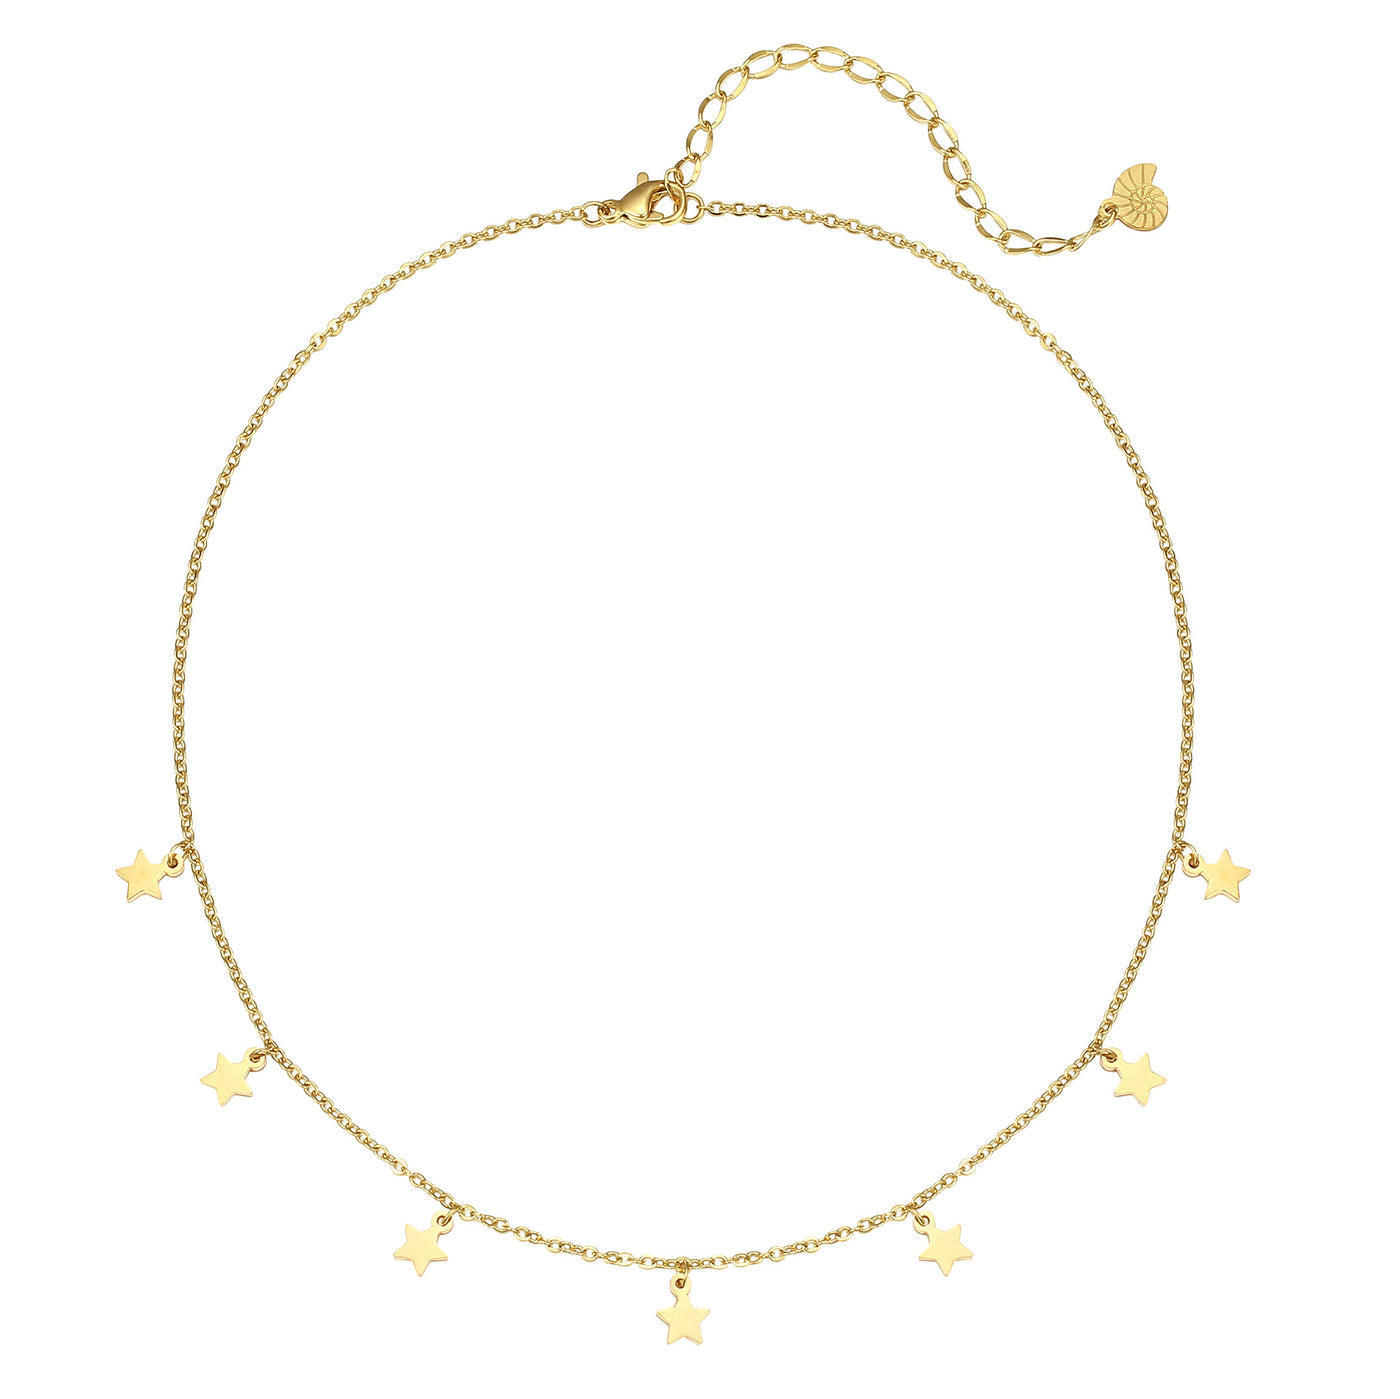 Delicate Star Necklace Gold